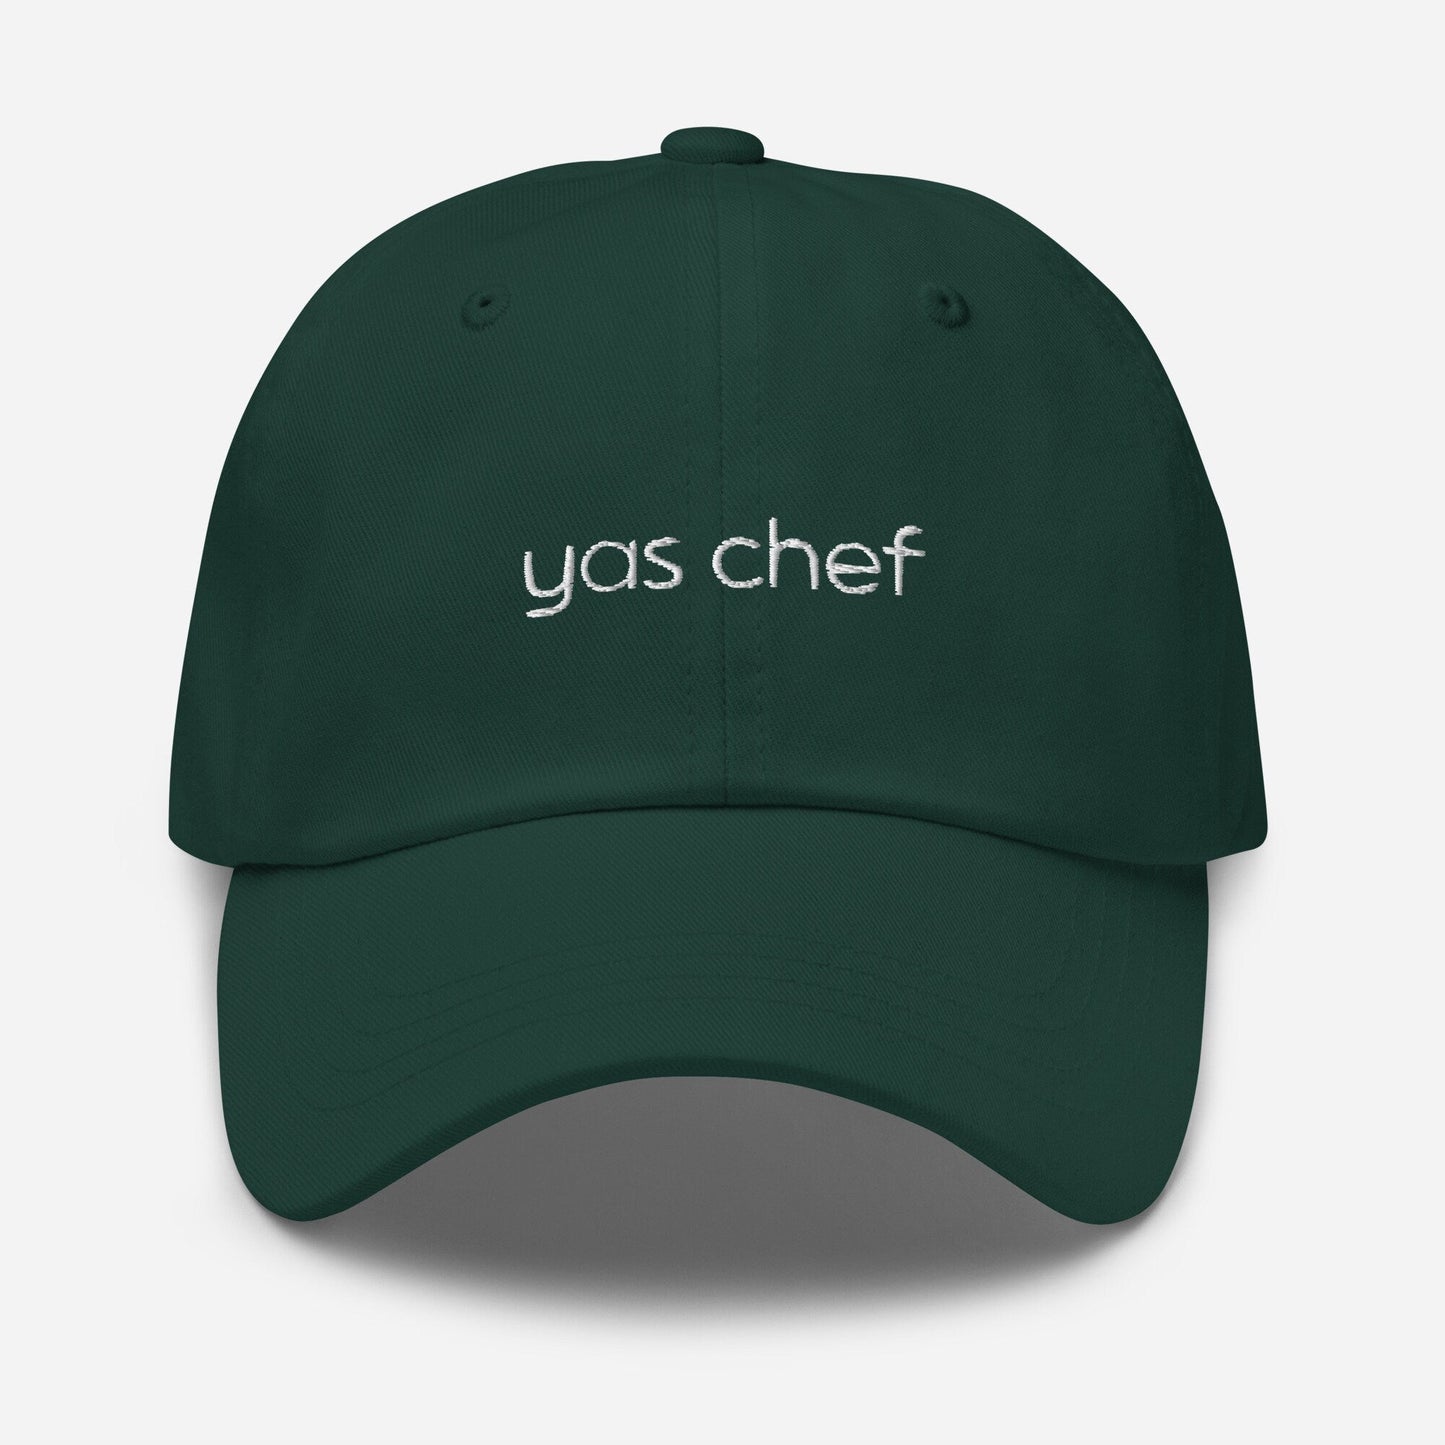 Yas Chef Hat - Yes Chef - Funny Gift for Foodies, Home Cooks, bakers & Chefs - Embroidered Cotton Cap - Evilwater Originals